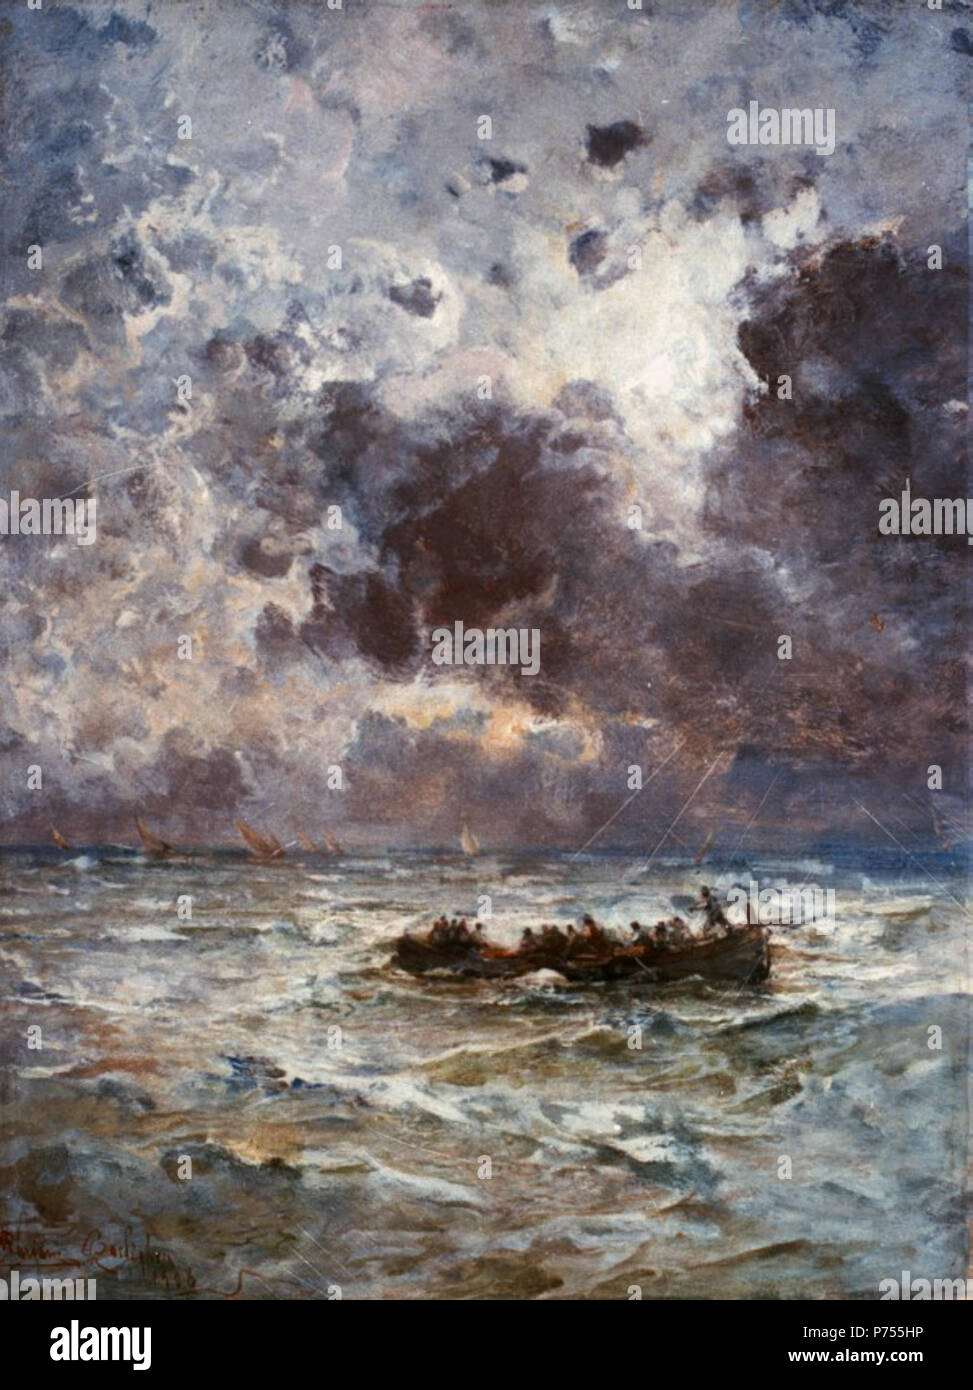 . Seascape at Bordighera .  This painting came into the Cariplo Collection from a private collection in 1992. The canvas is an example of the artist’s best-known work, namely the long series of seascapes that began in 1883 with evocative views of the harbour in Genoa. This subject proved a great success with the public and critics from the very outset at the exhibitions in Genoa, Florence and above all Milan, where Mariani won the prestigious Principe Umberto Prize in 1884 with The Farewell of the Dying Sun (private collection). In the exploration of new avenues that expanded the artist’s repe Stock Photo